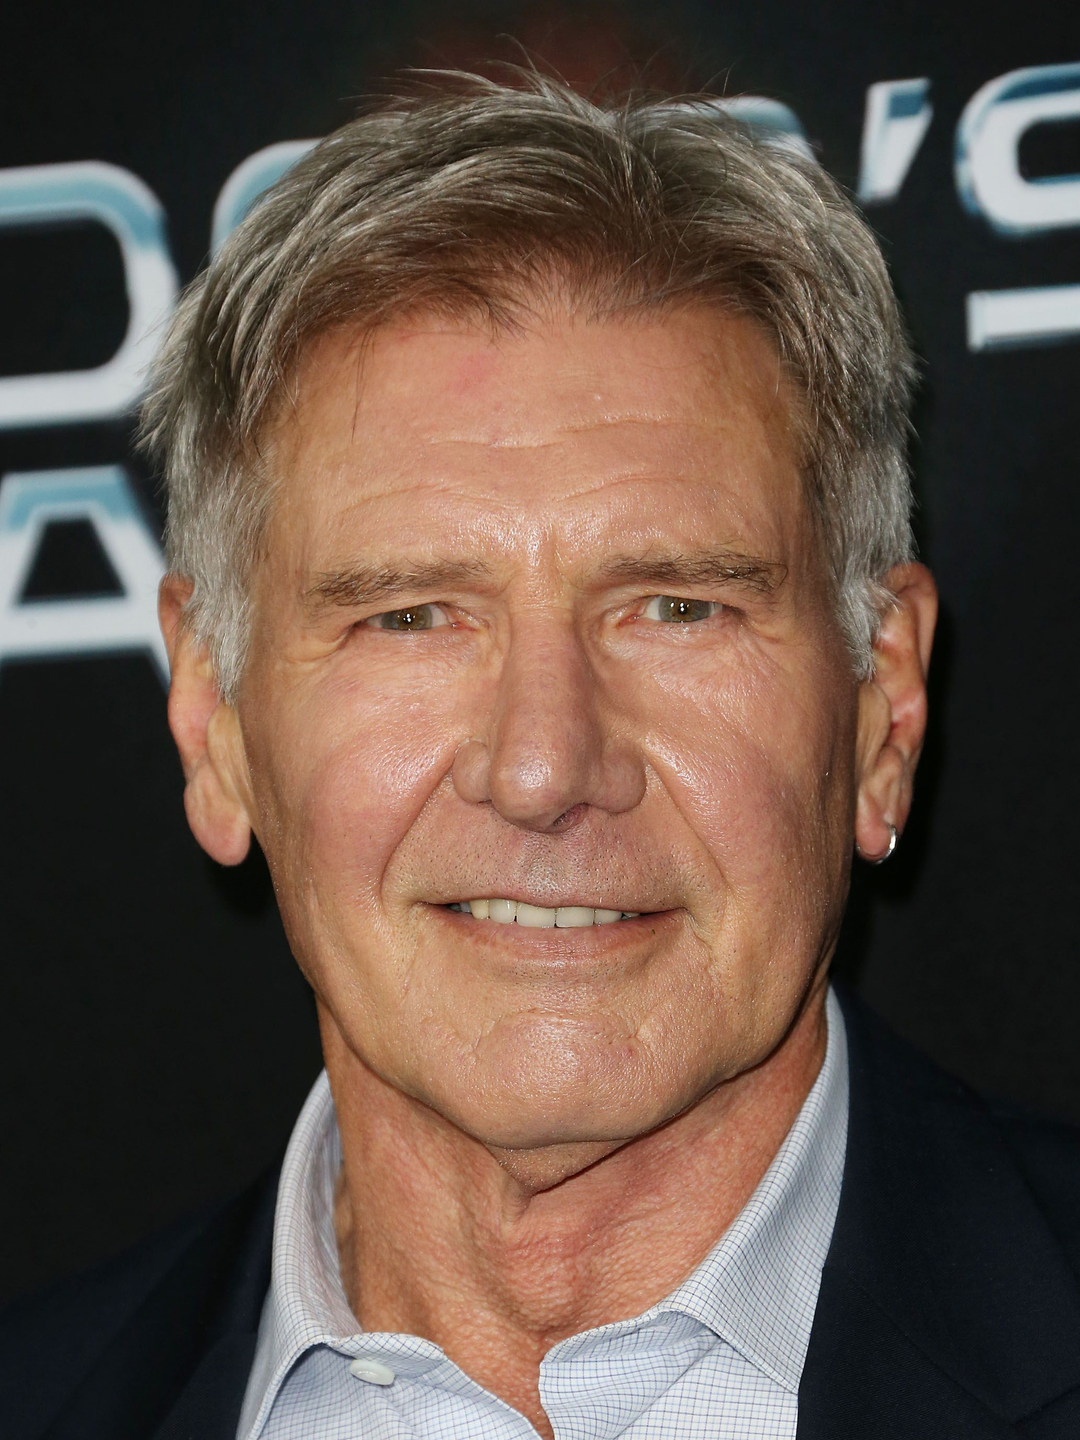 Harrison Ford who is his mother